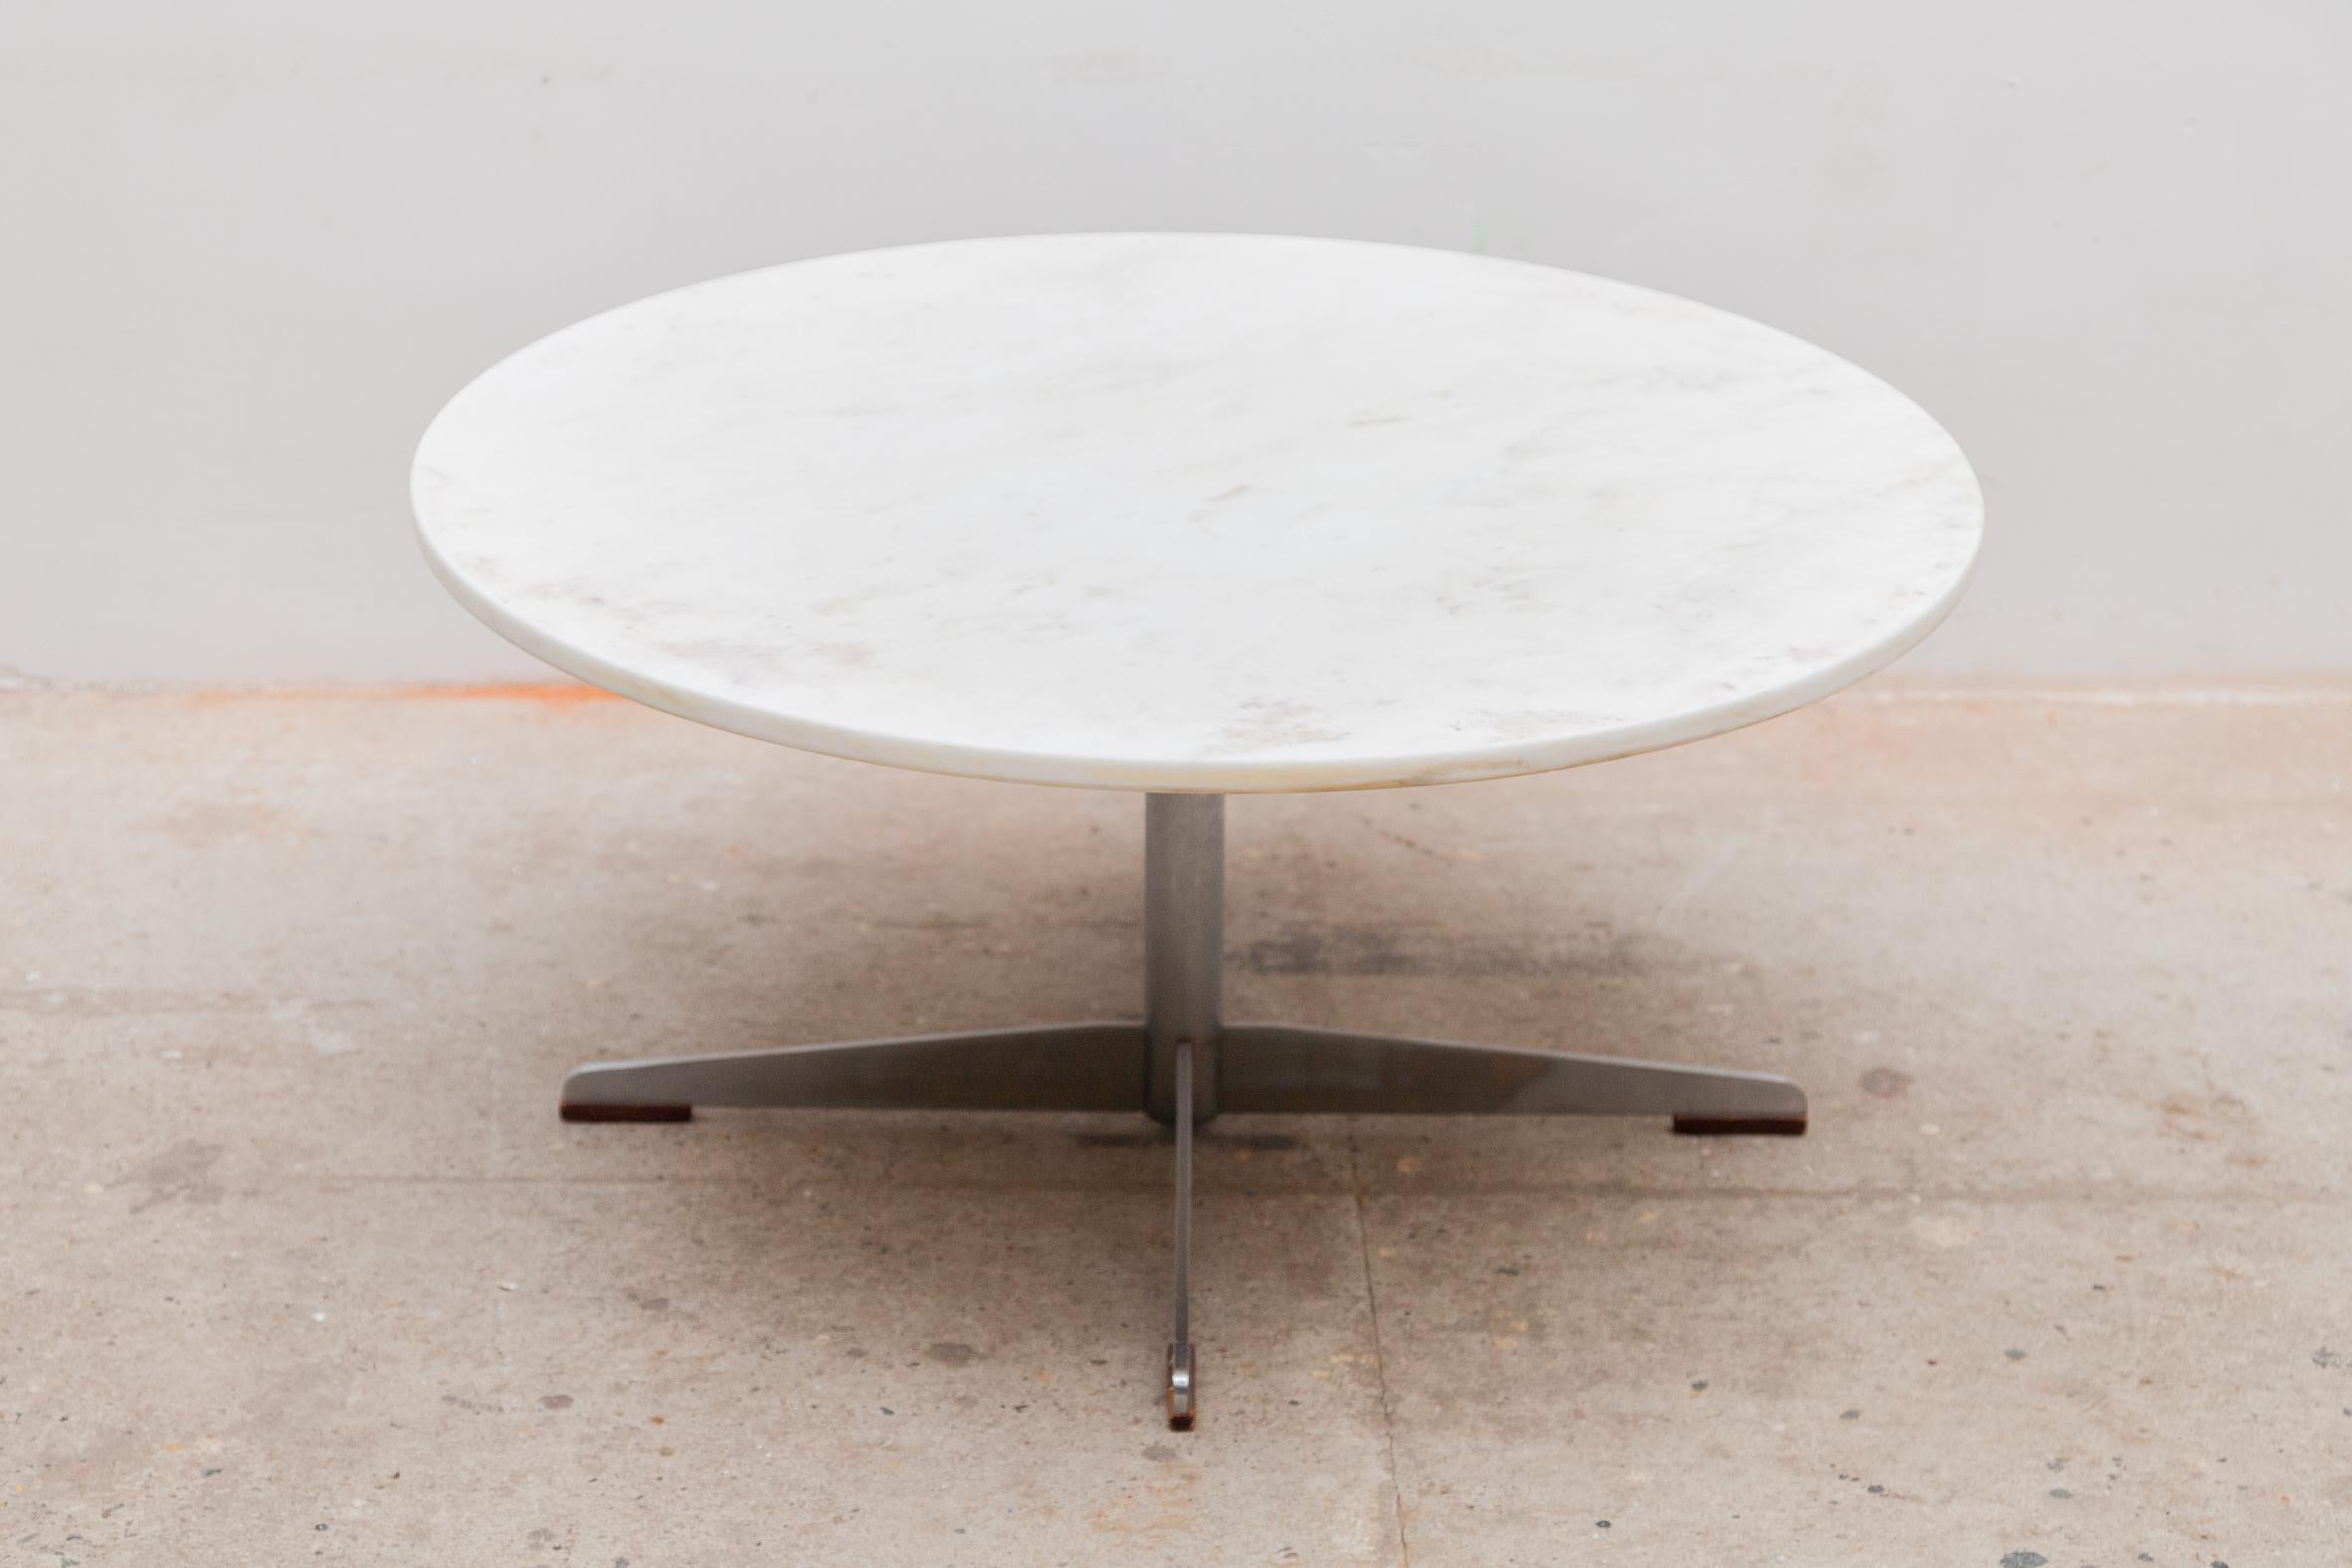 Round Carrara marble coffee table in style of Florence Knoll for Knoll. This design is an architectural classic with the knife-edge bevel and chrome pedestal base. In original good condition.